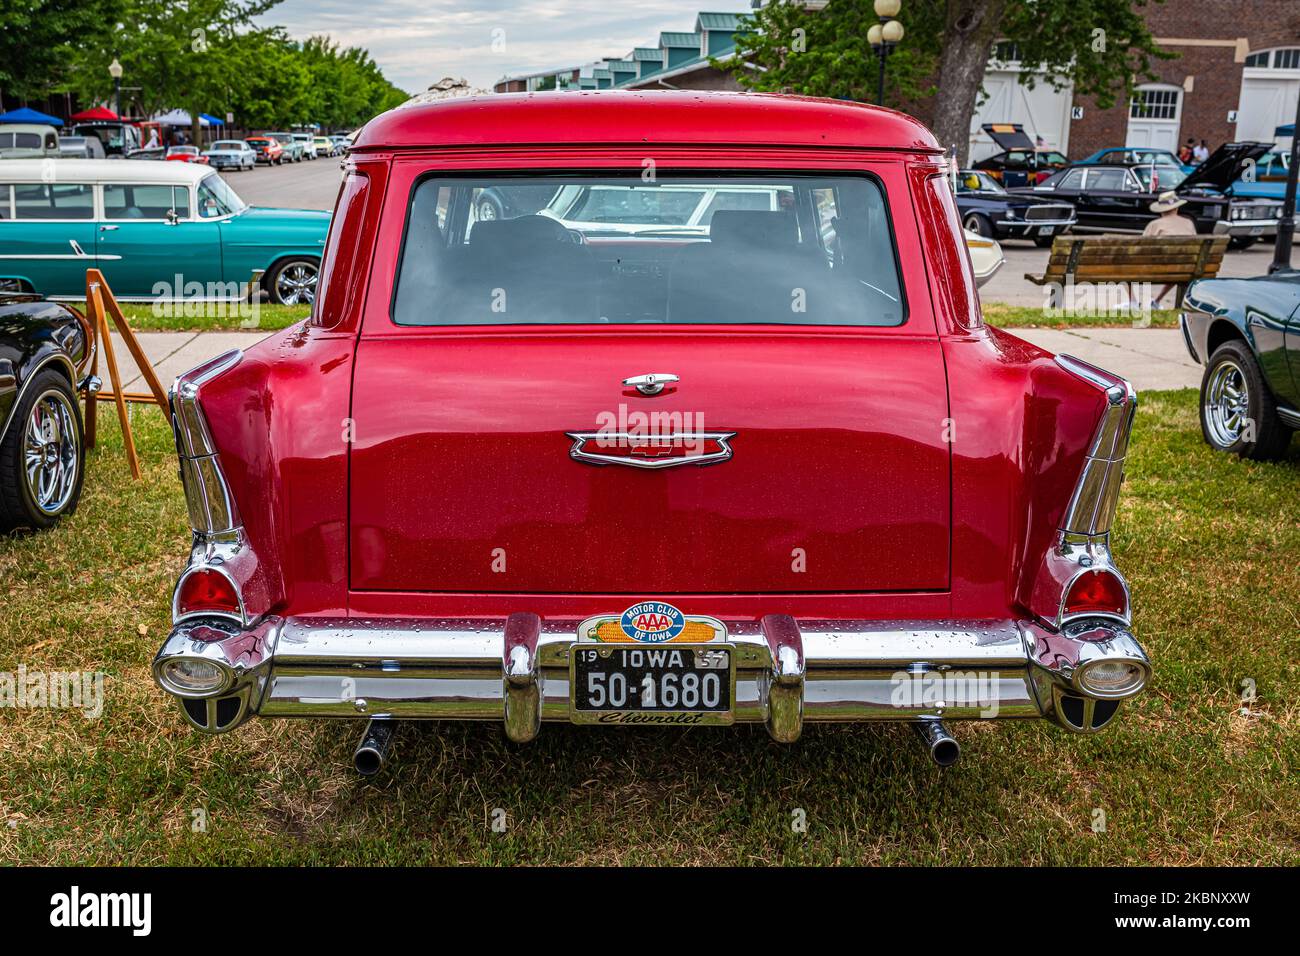 Des Moines, IA - July 01, 2022: High perspective rear view of a 1957 Chevrolet BelAir Sedan Delivery at a local car show. Stock Photo